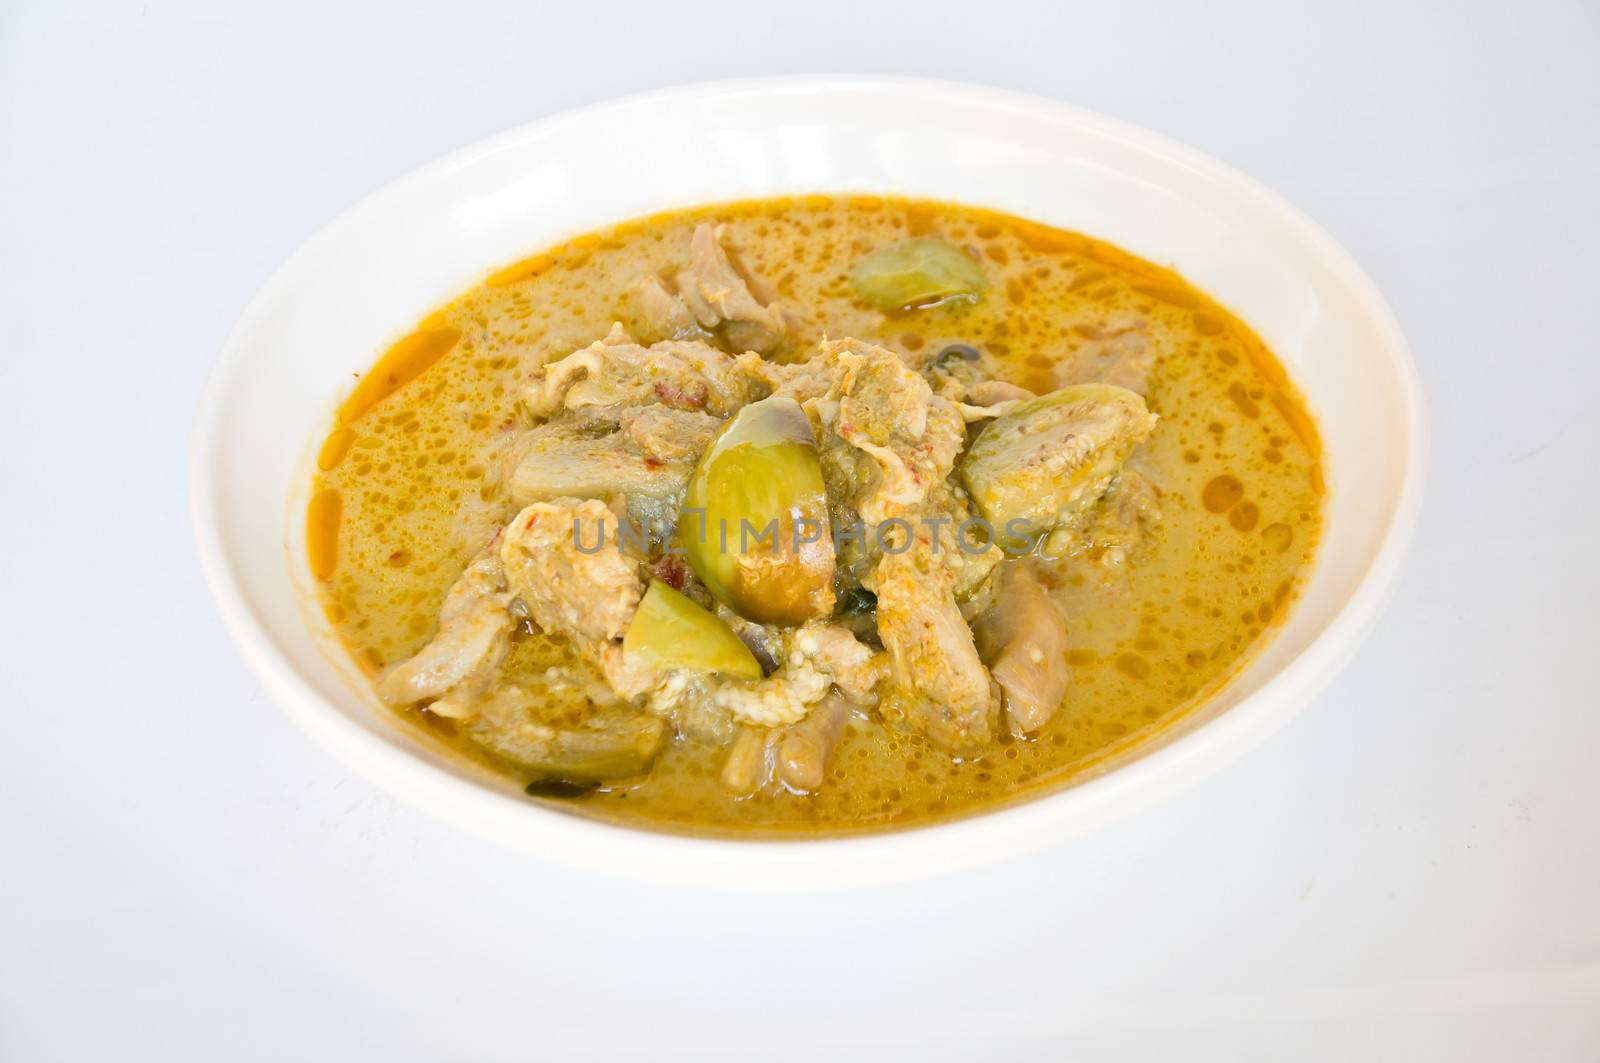 delicious Thai food call KAENG KEAW WAN KAI from chicken and spicy curry